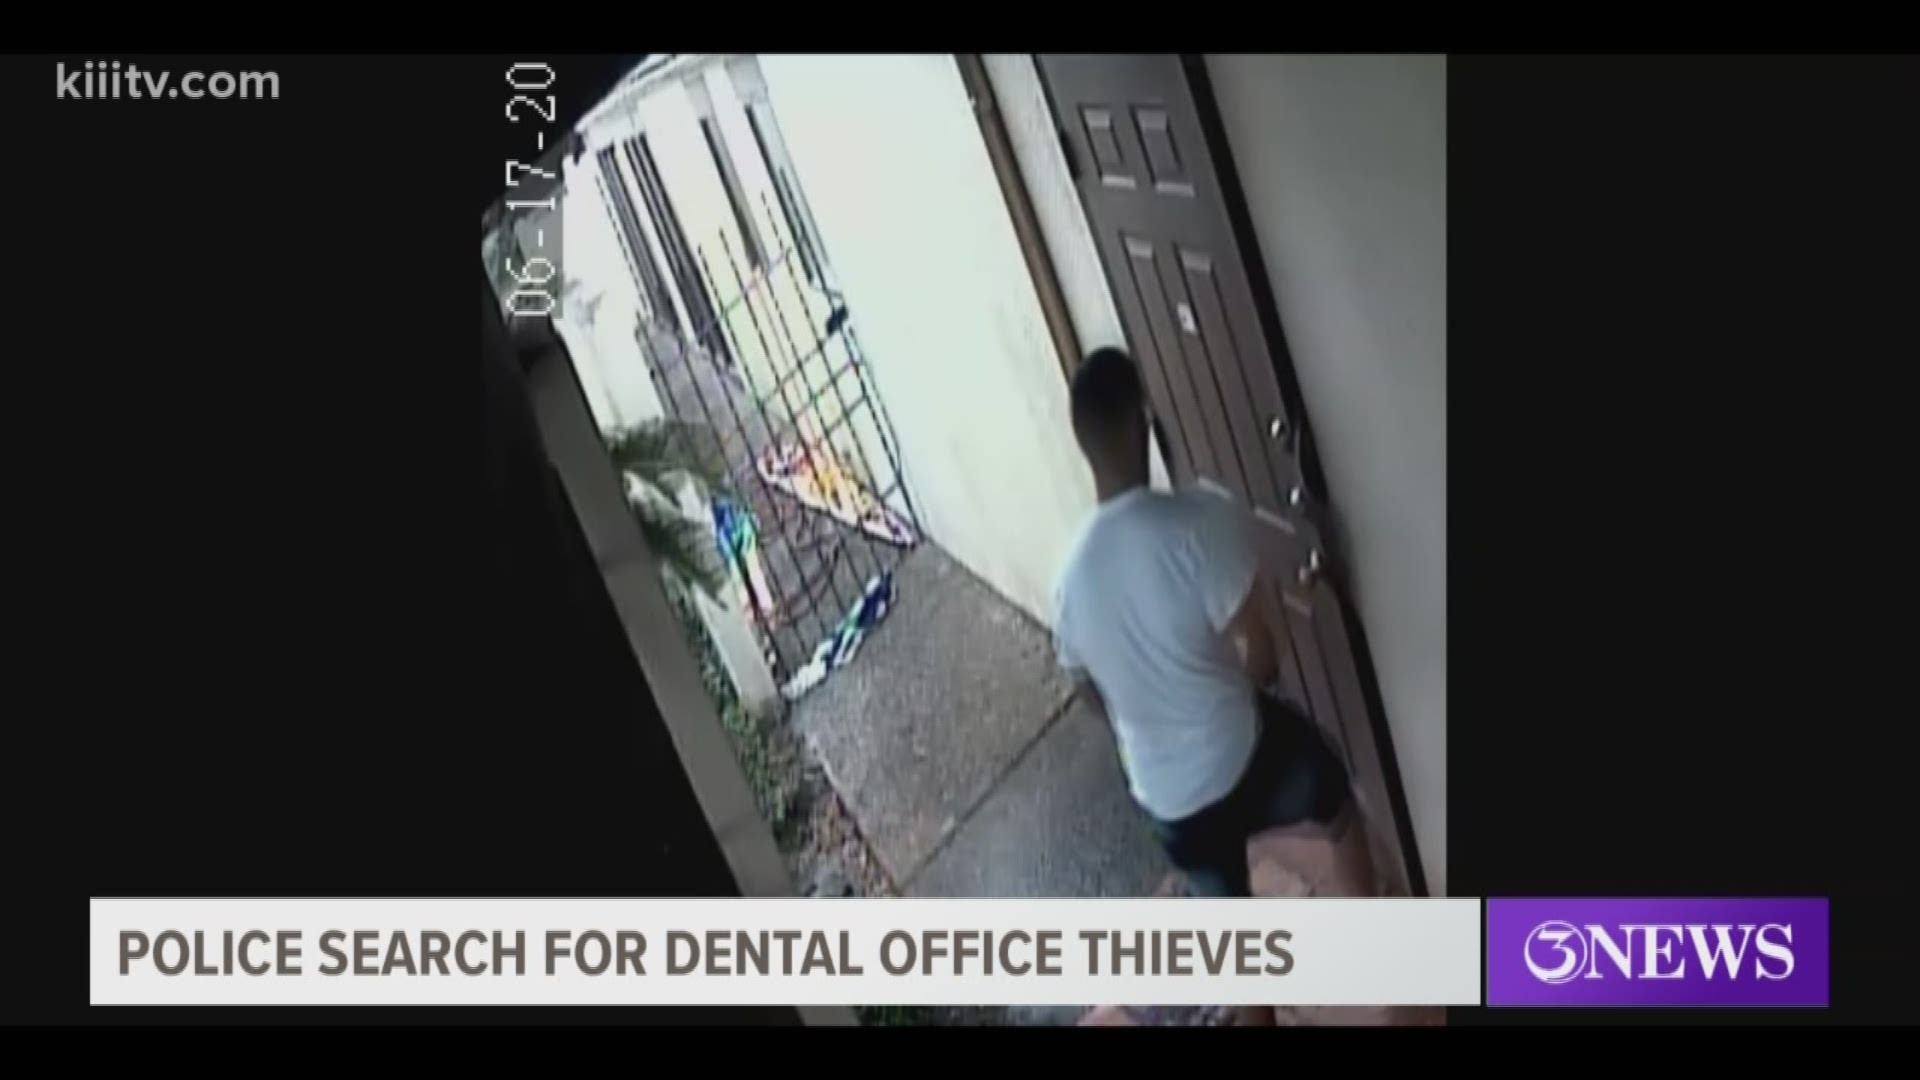 Police detectives are reaching out to the public in hopes of catching a pair of suspects accused in the burglary of a local dental office.